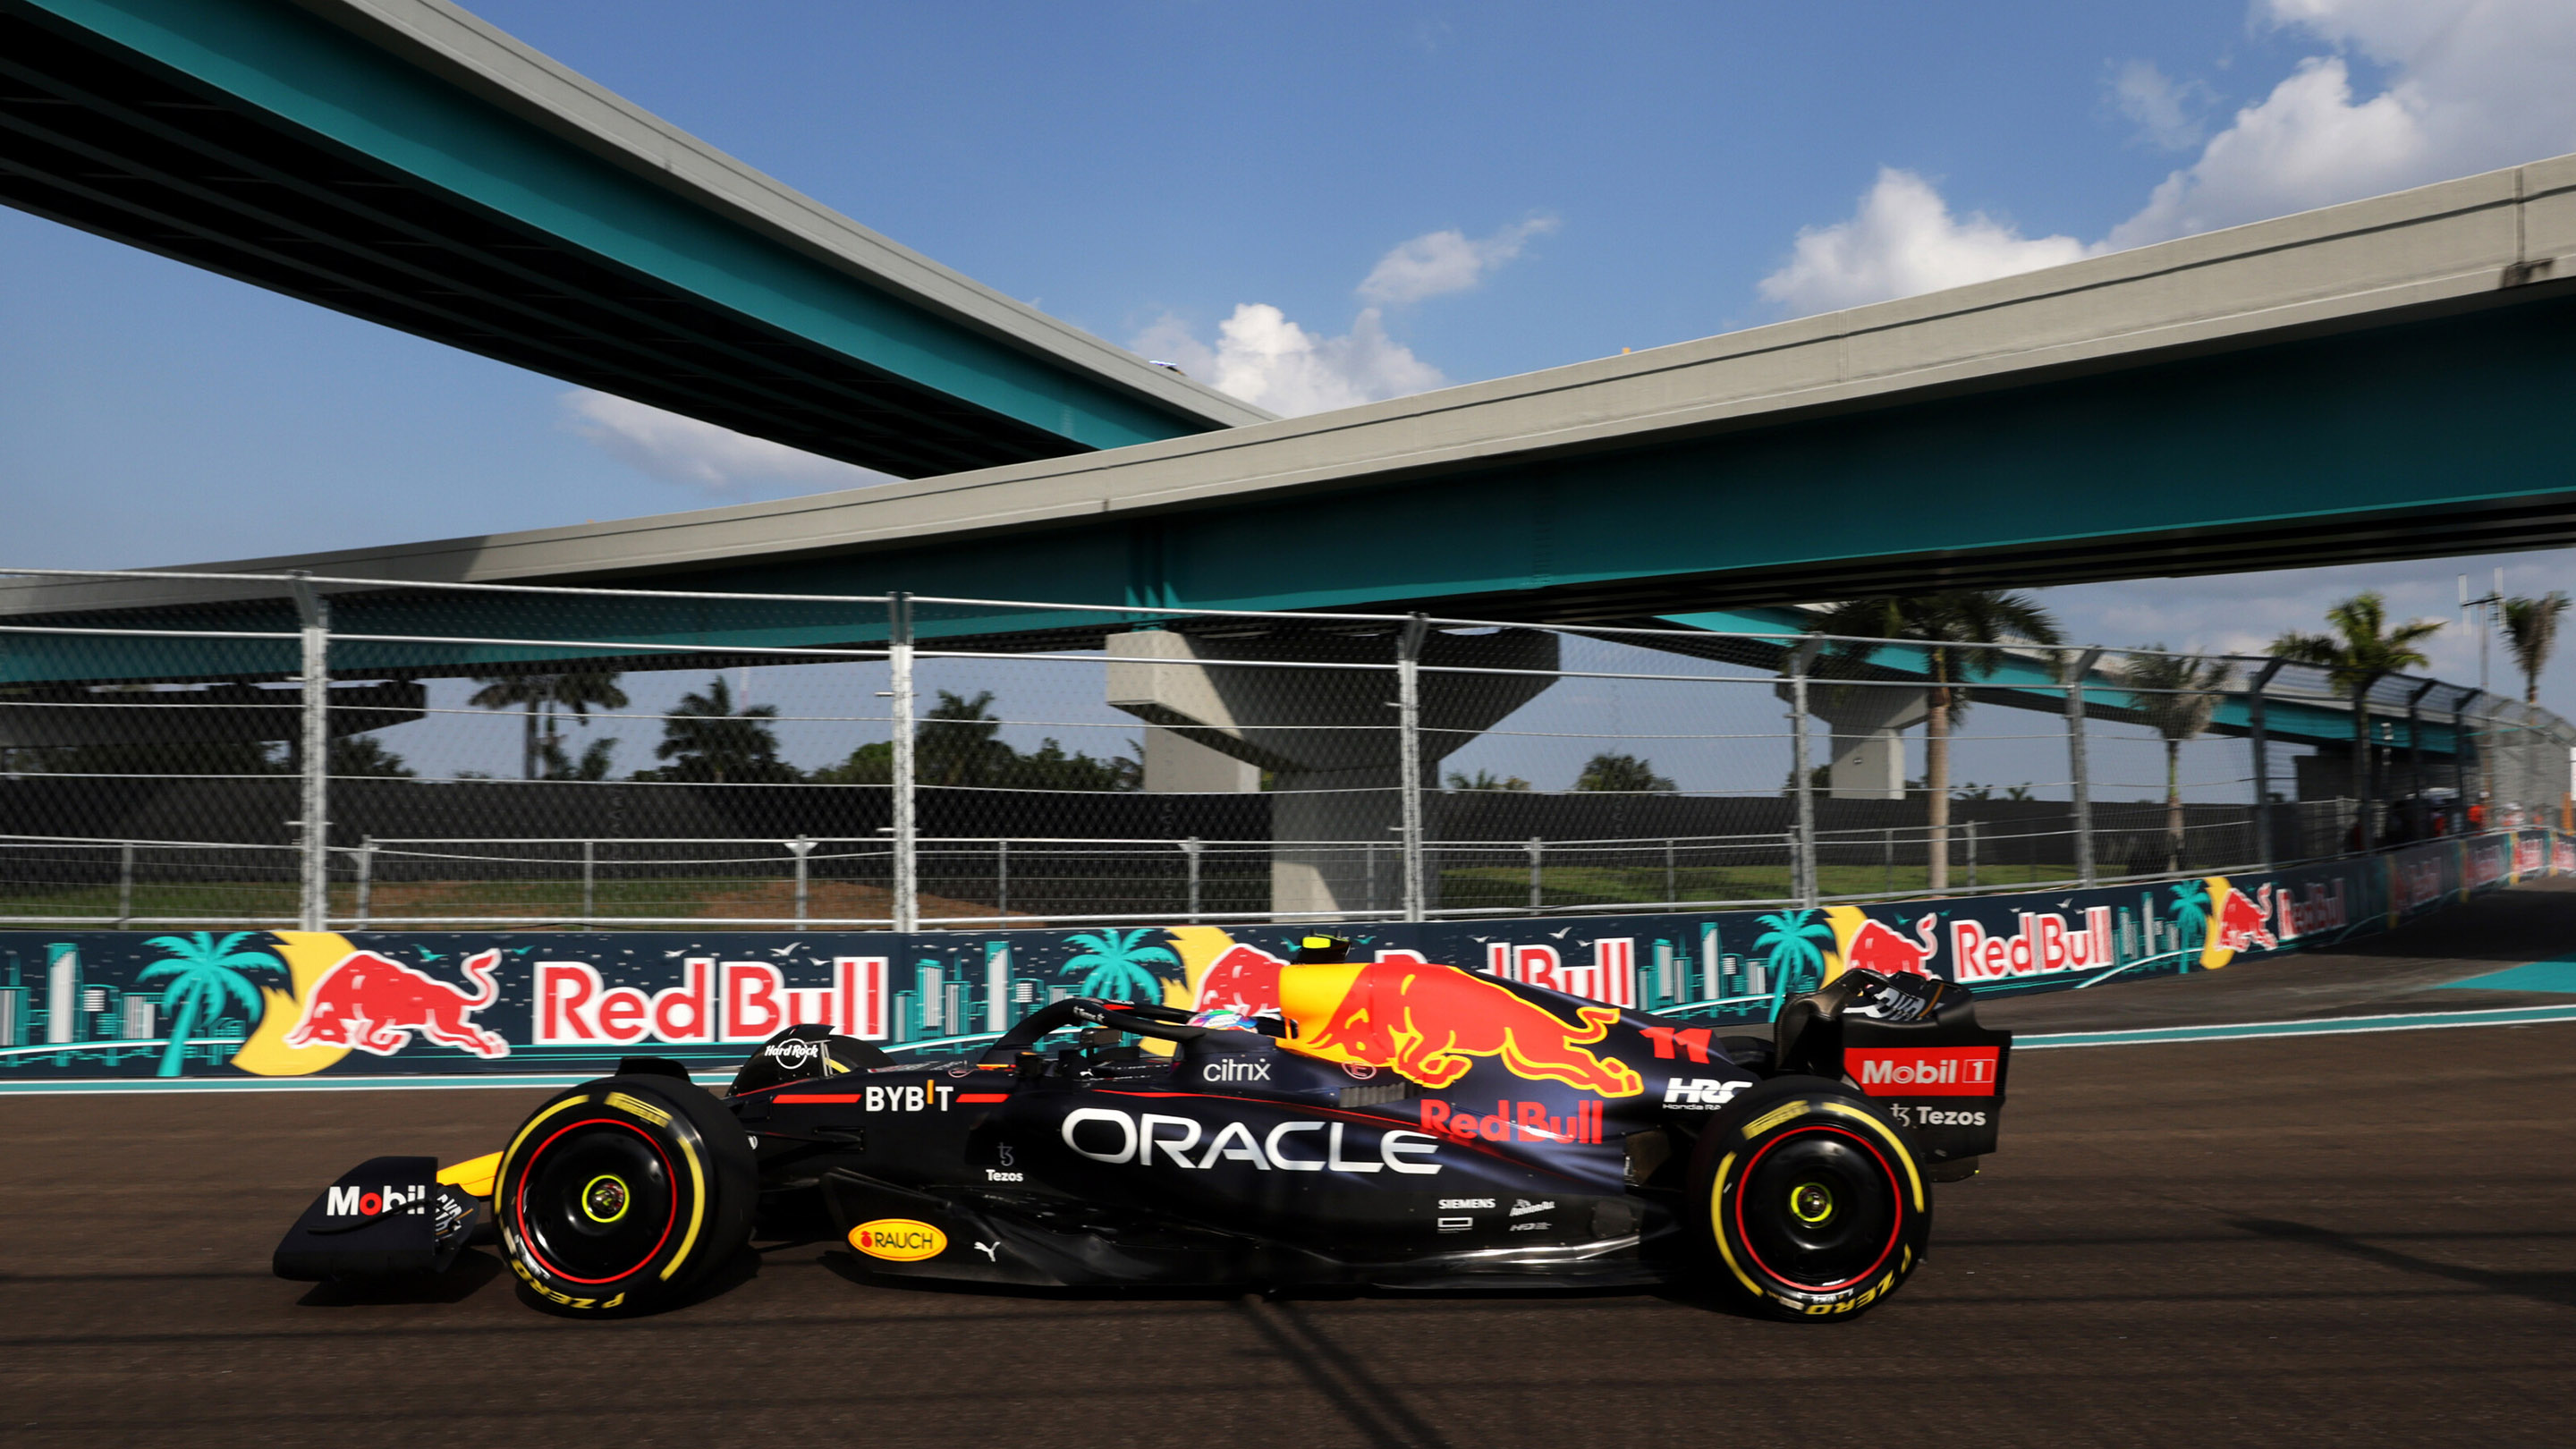 Image The 2022 F1 season has seen a raft of new rules introduced which has resulted in a completely new look and feel for the cars. To find out more about the Oracle Red Bull Racings RB18, click here to view the launch.